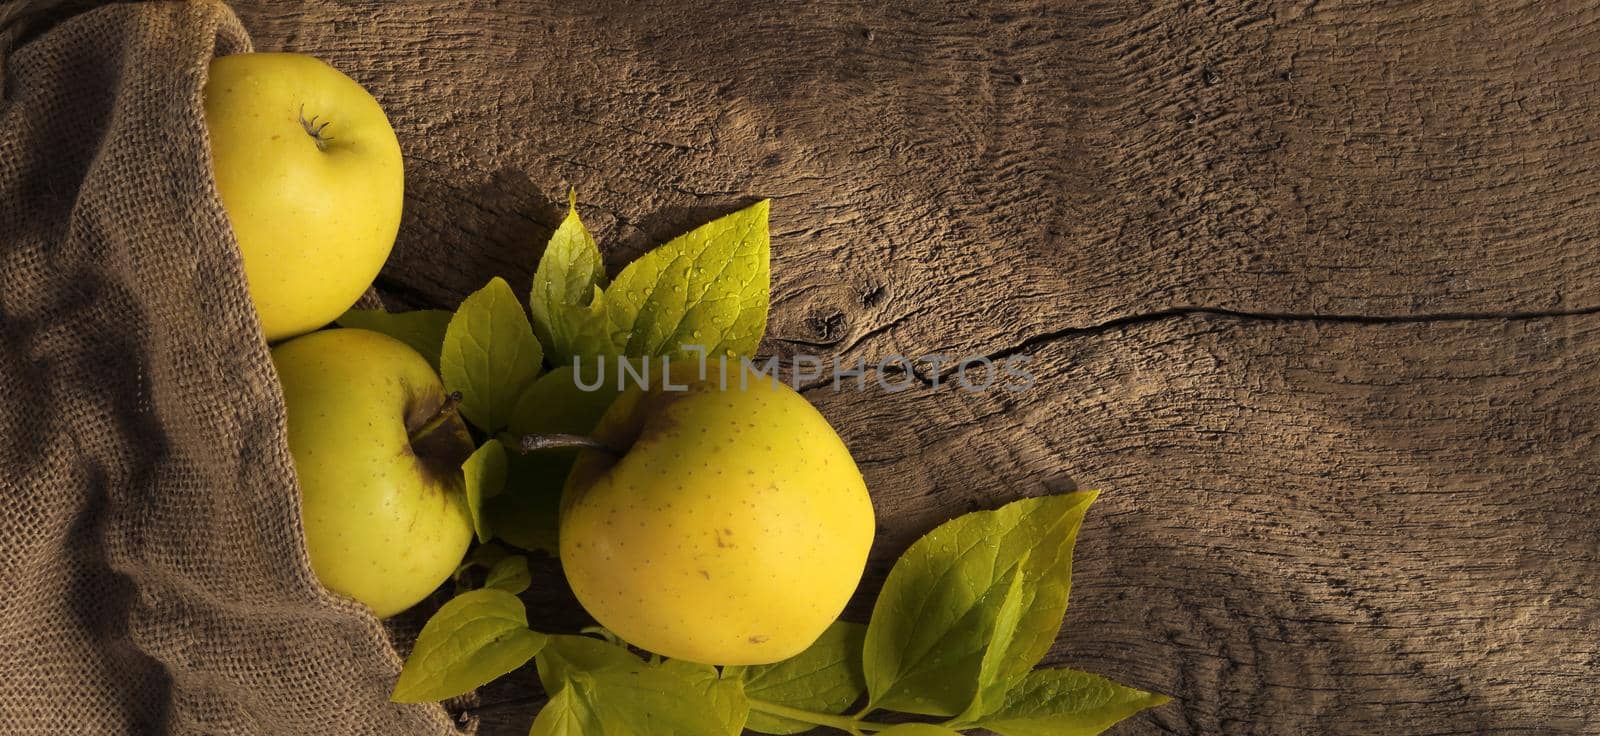 Rustic background with green yellow apples by NelliPolk